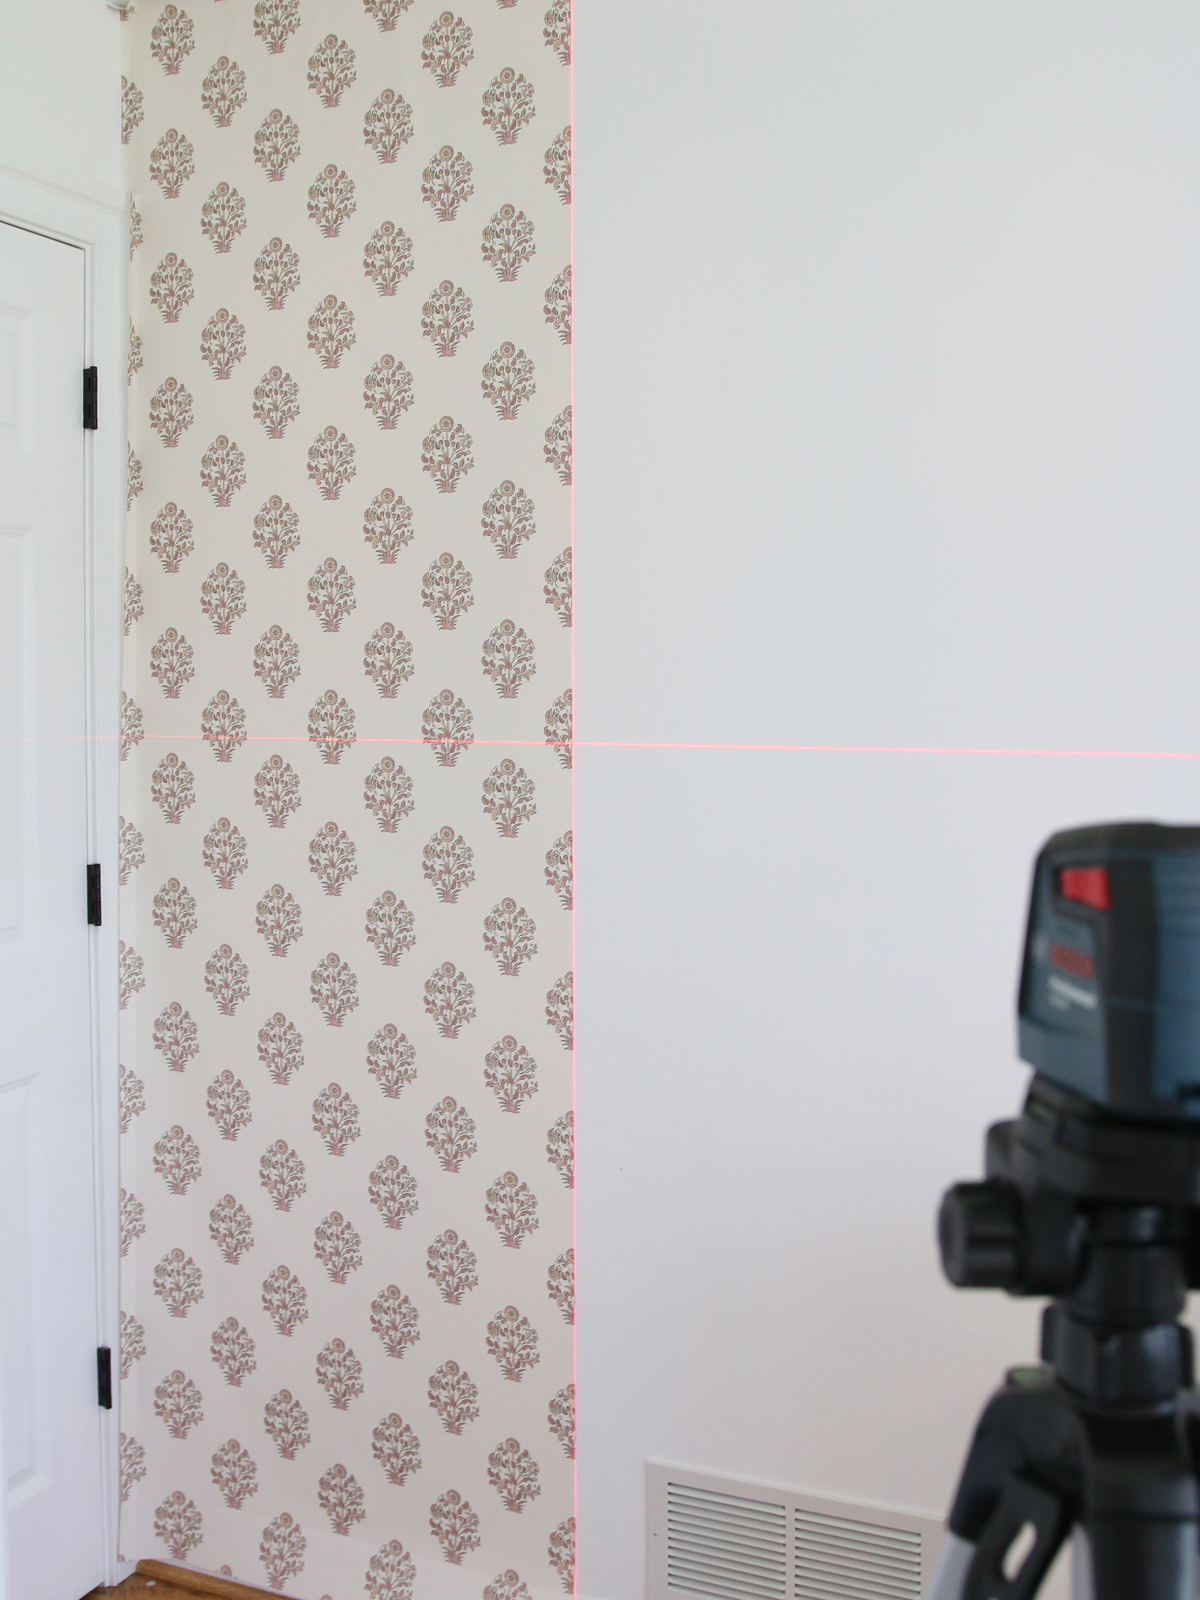 first strip of wallpaper in a corner with a laser level plumb line